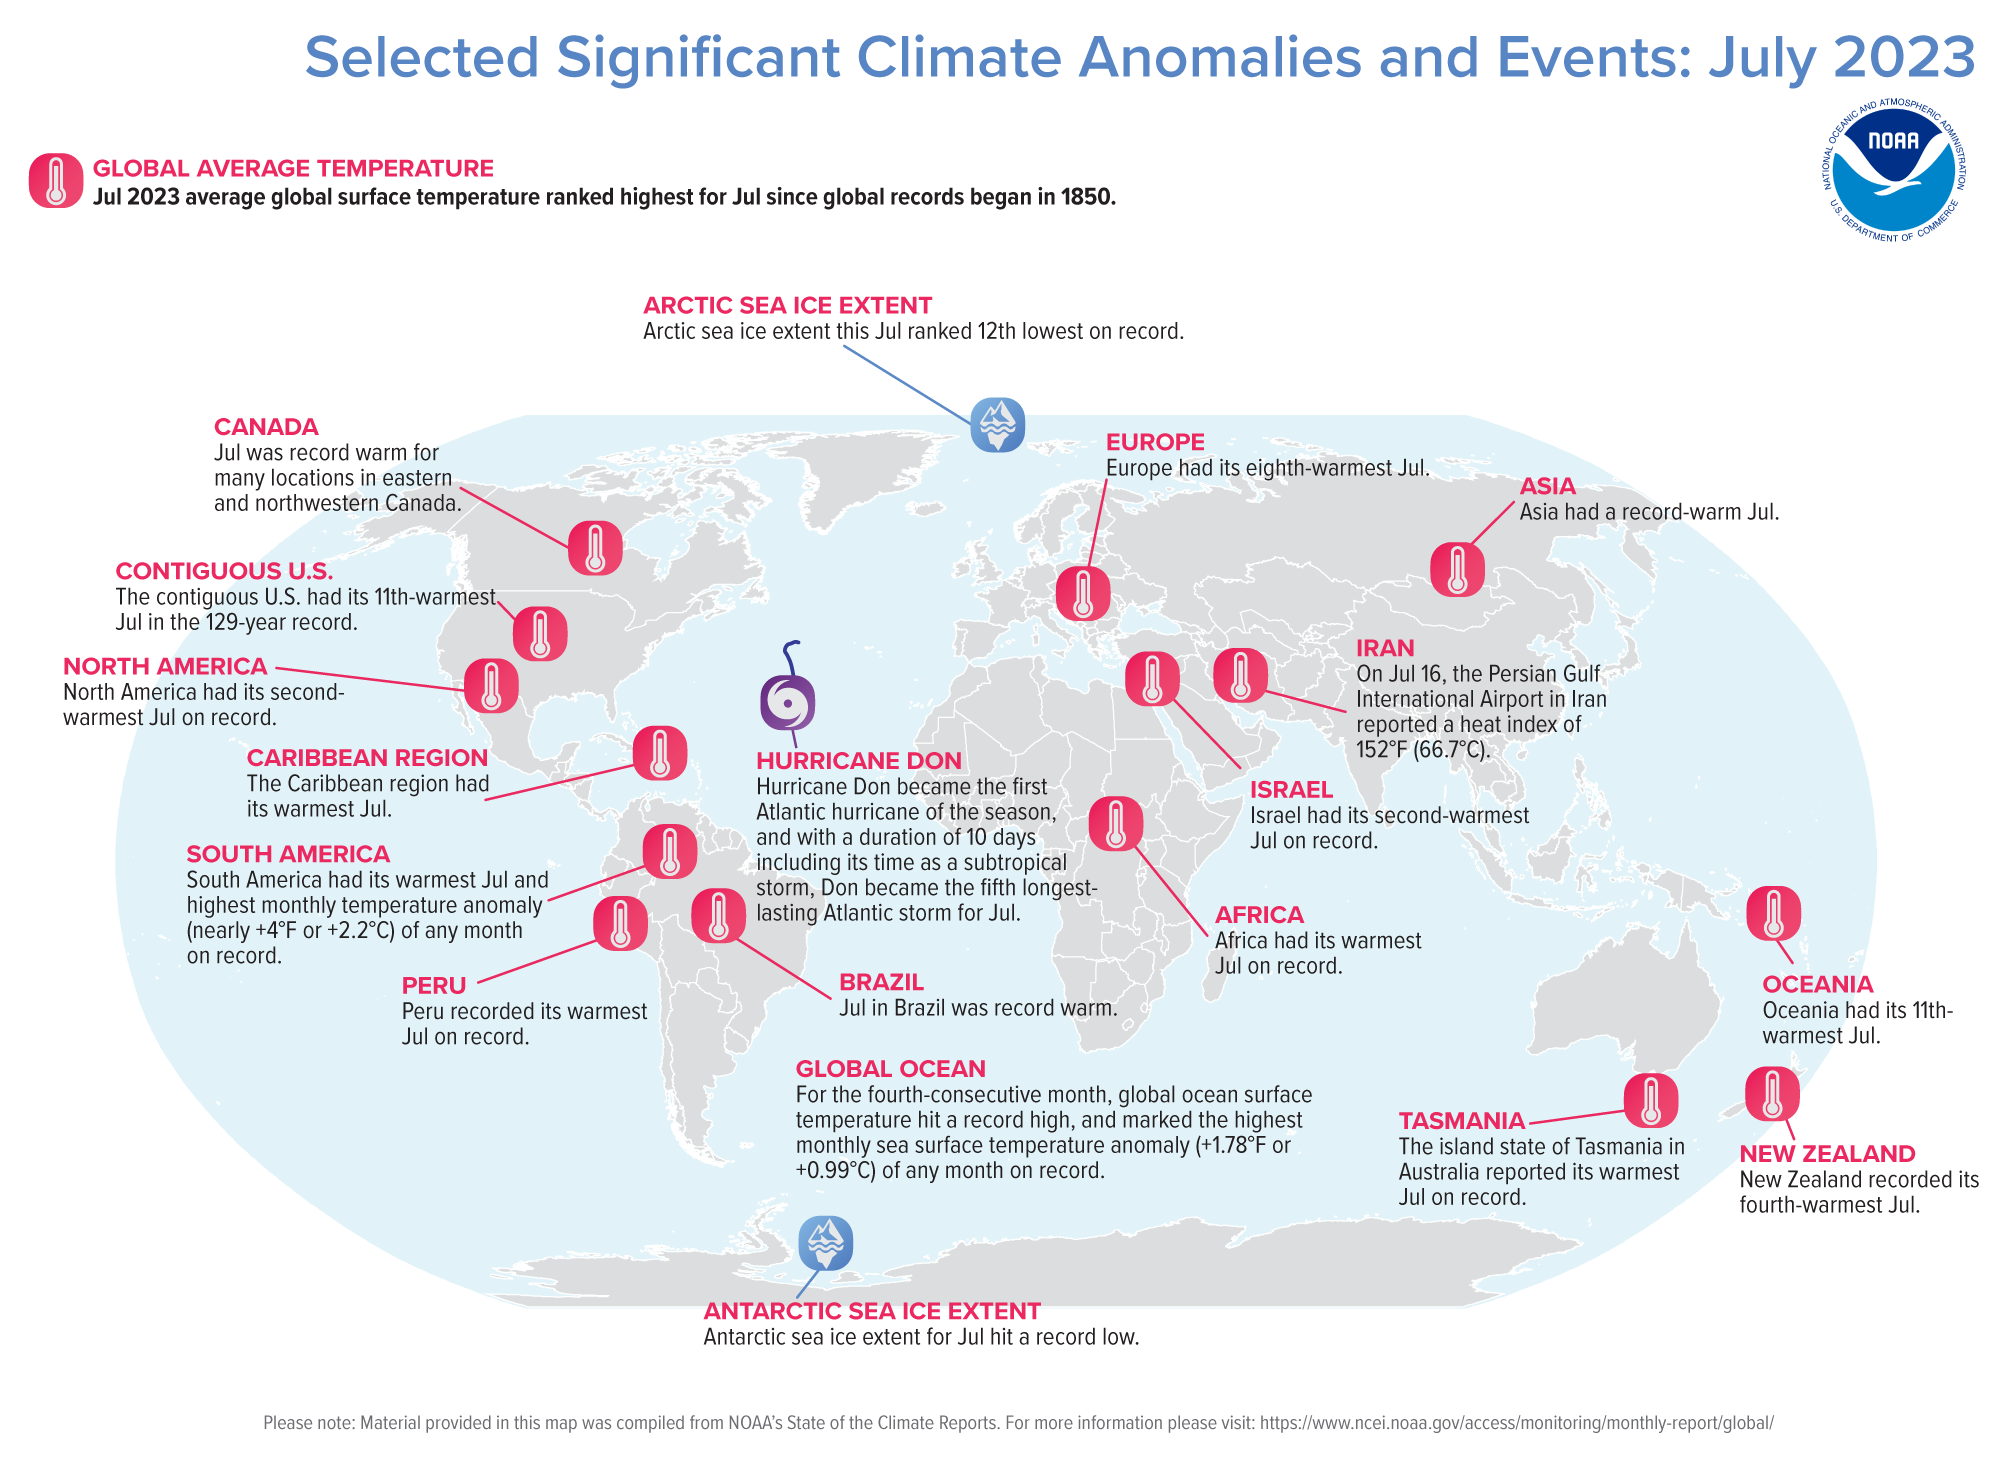 NOAA Selected Climate Events July 2023